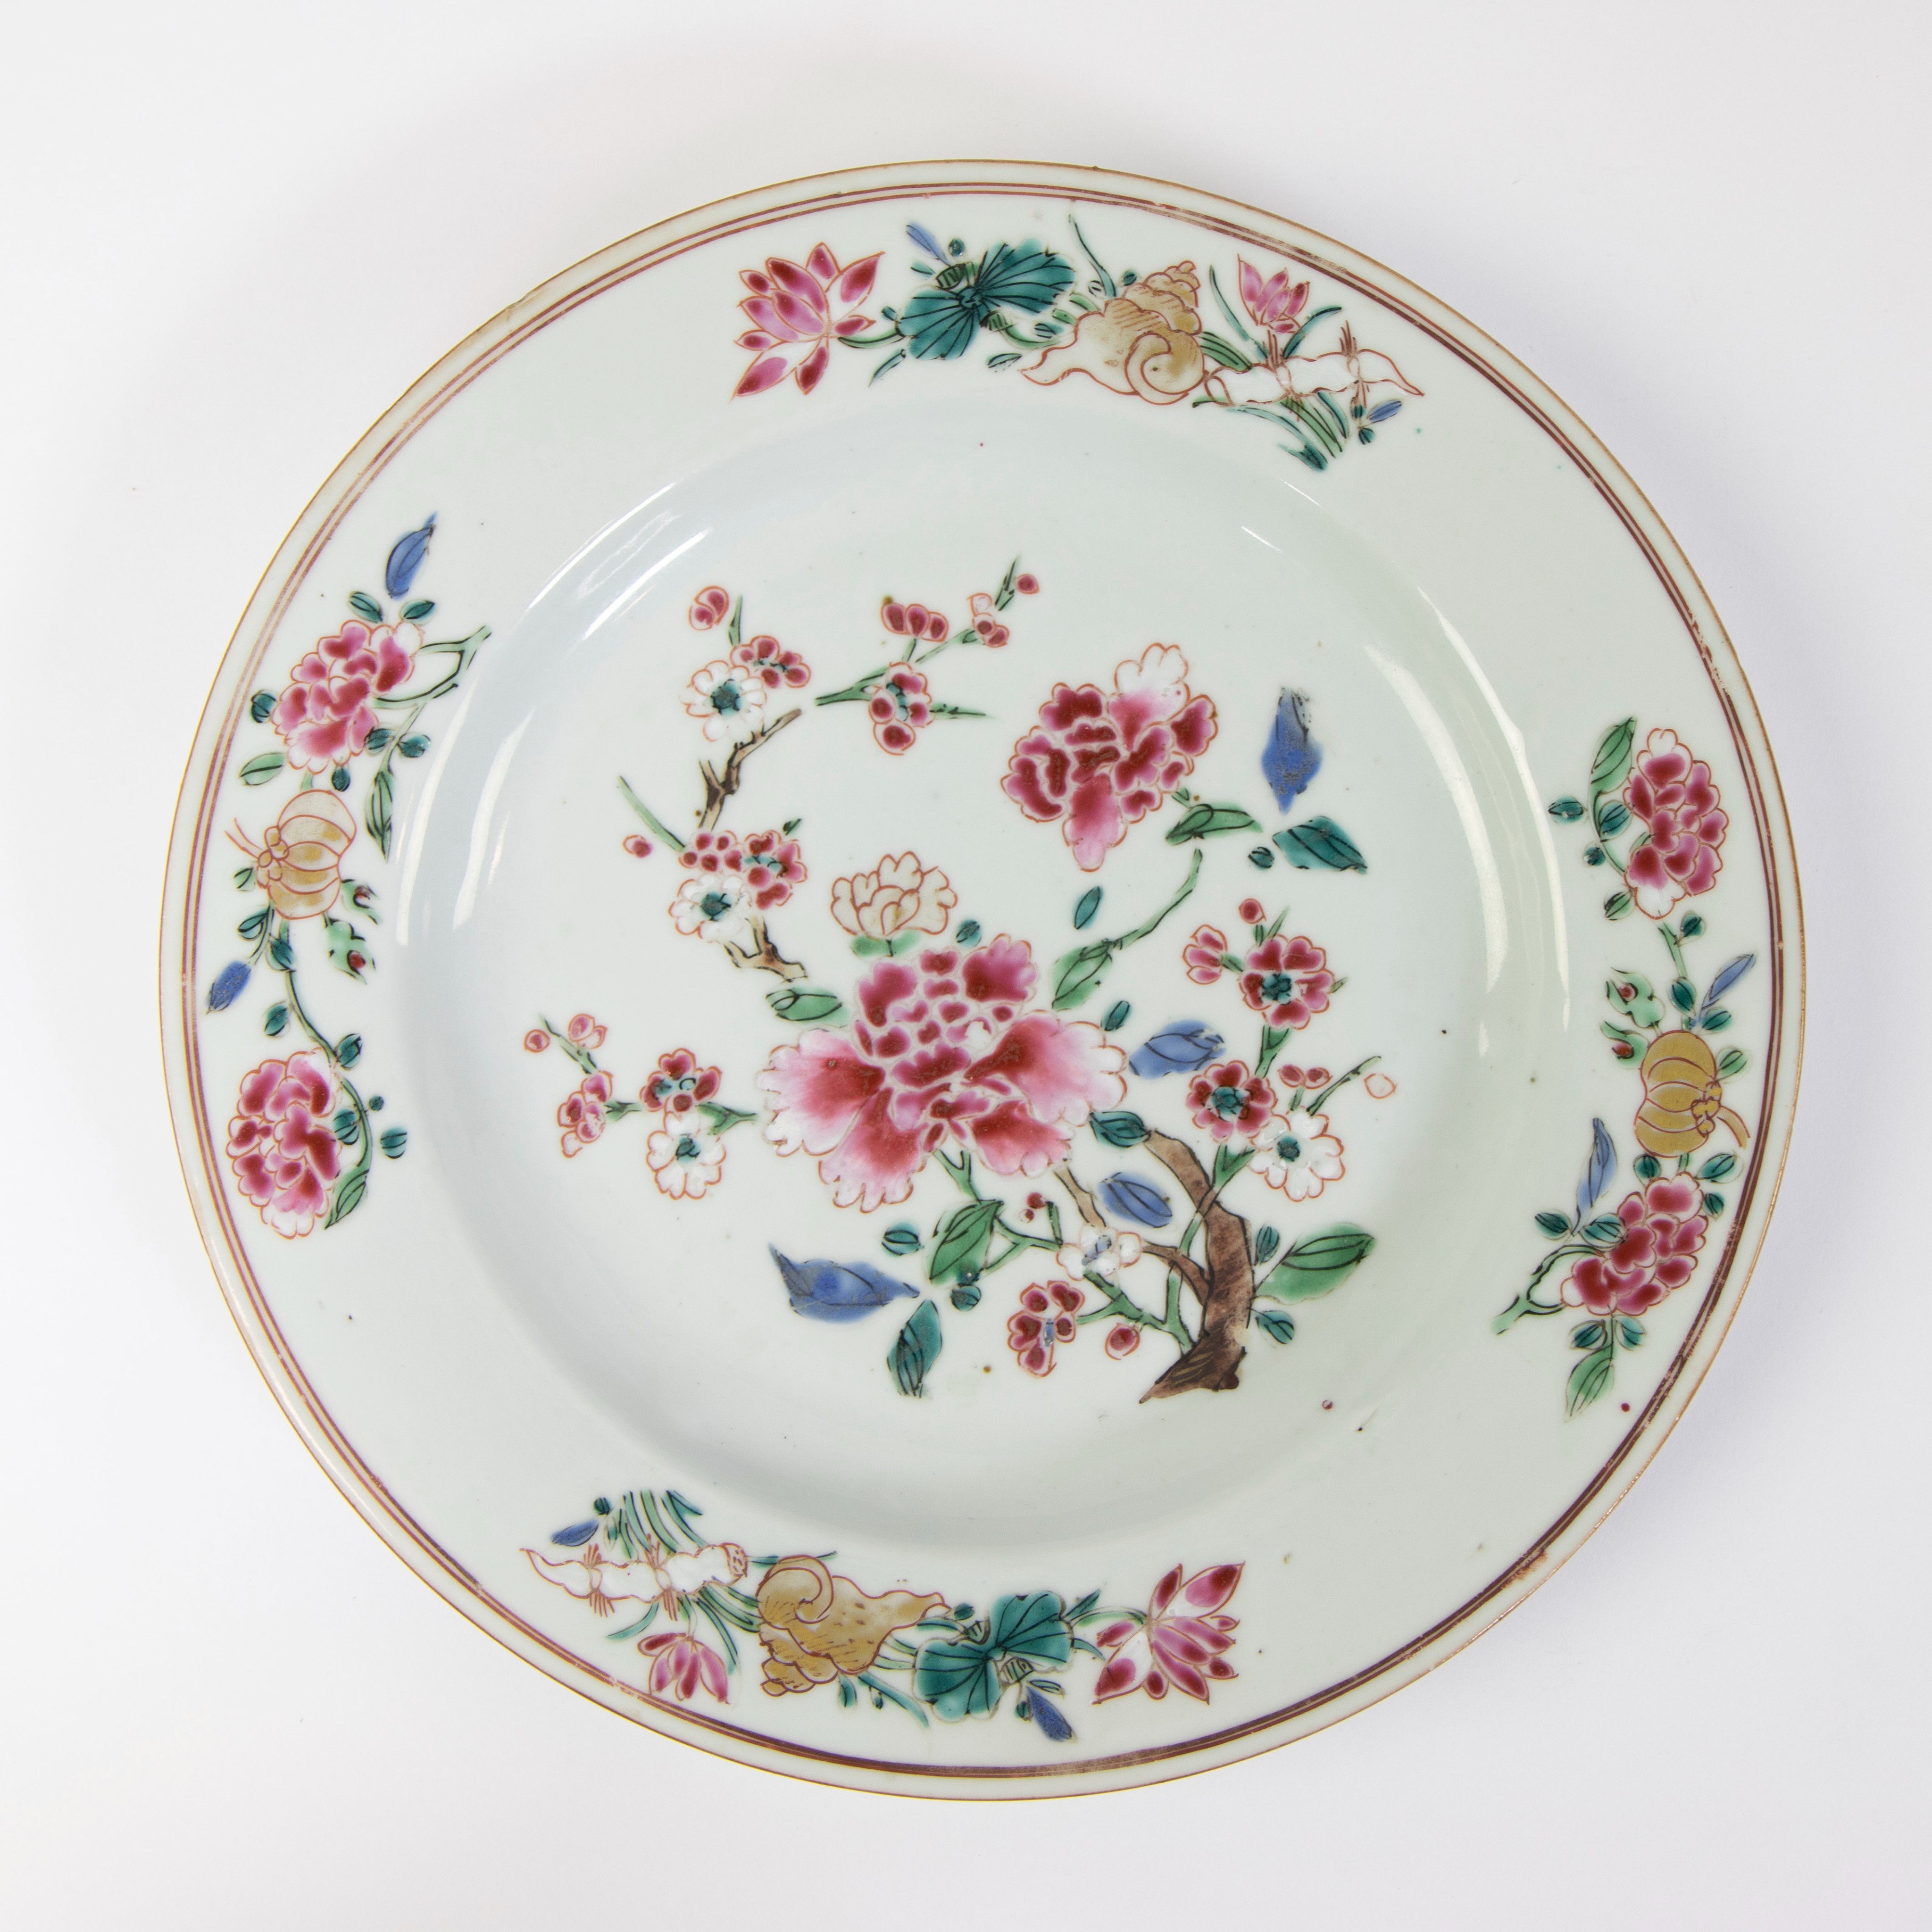 Lot of 5 Chinese famille rose plates, 18th century - Image 10 of 18